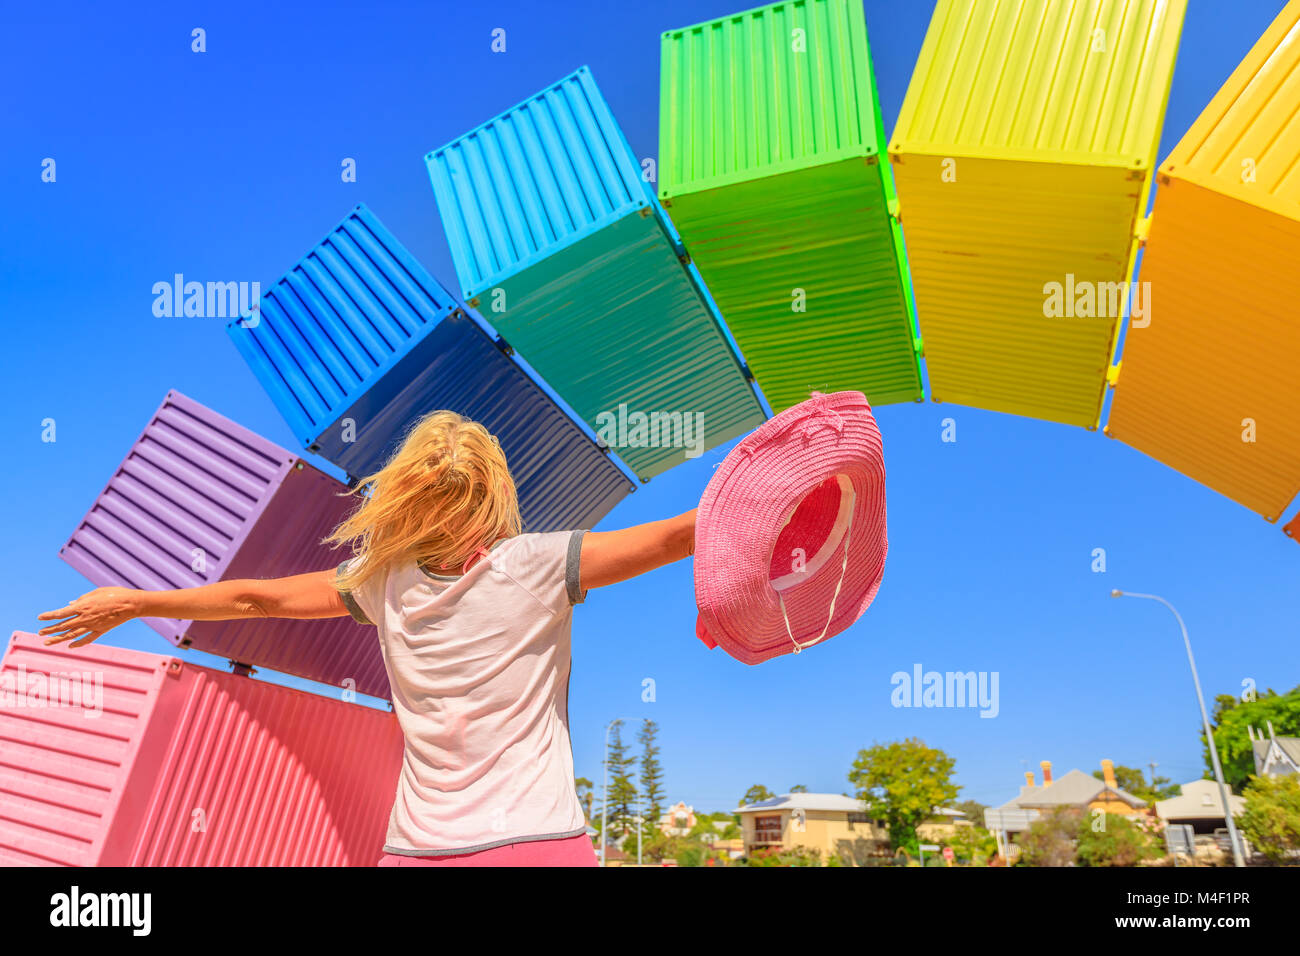 Fremantle, Australia - Jan 7, 2018: Carefree woman looking rainbow sea container in blurred background. Fremantle Port, Perth. Female tourist enjoys at Fremantle welcome.Homosexuality and hope symbol Stock Photo